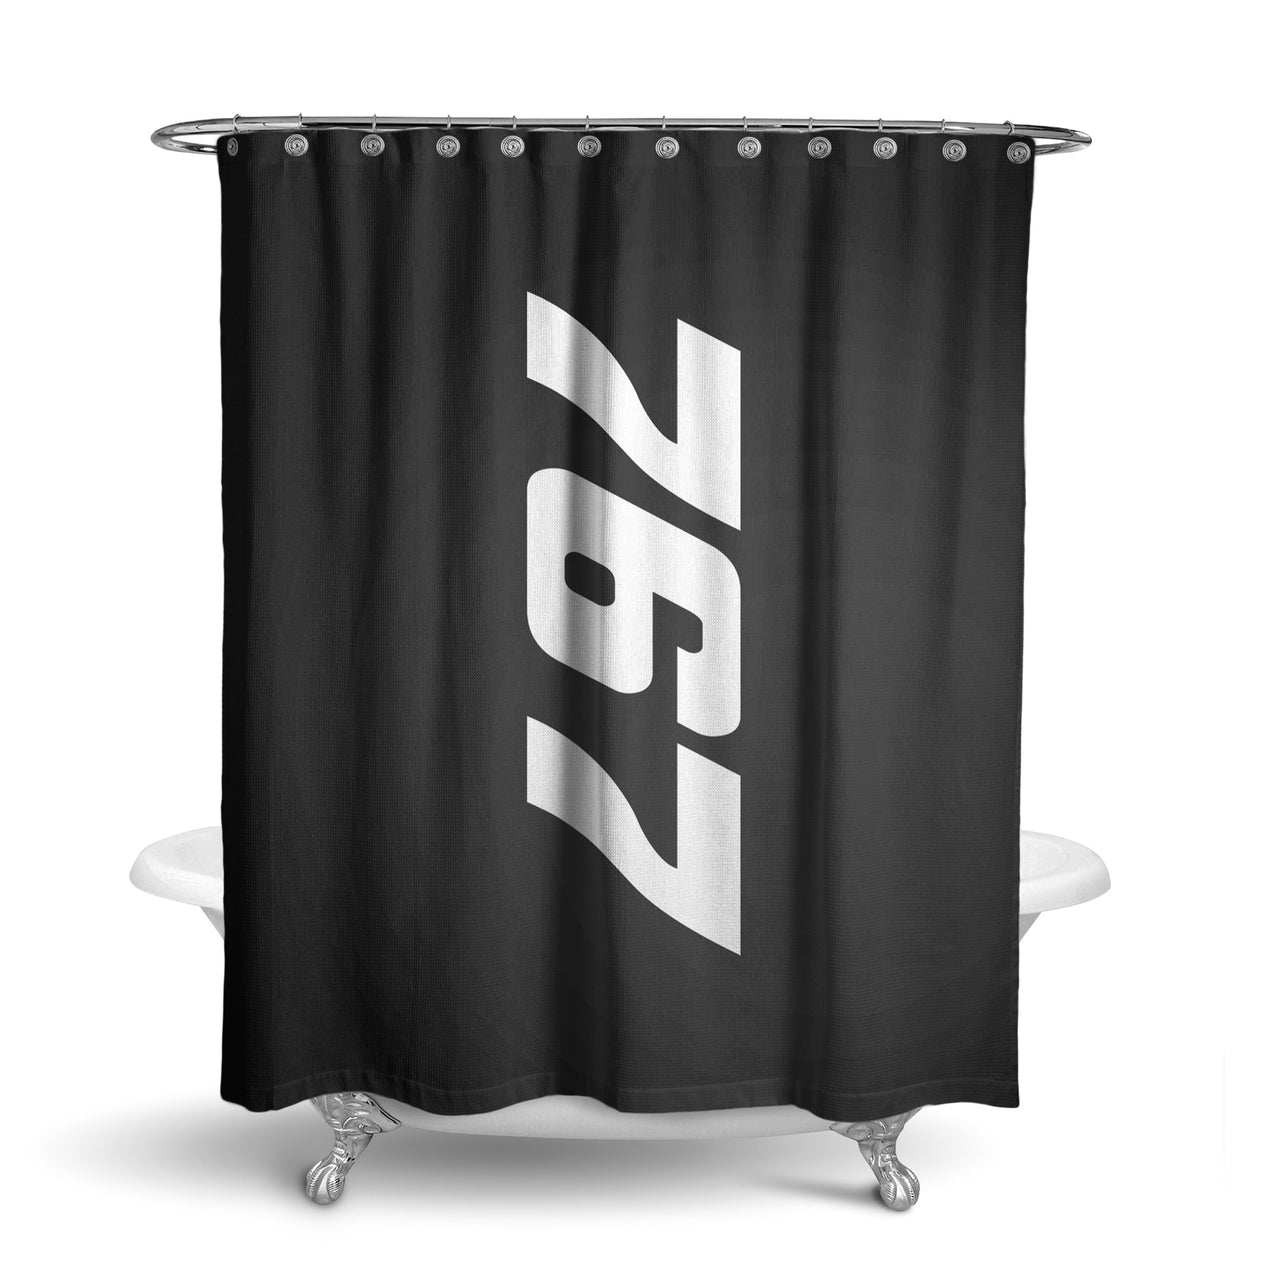 Boeing 767 Text Designed Shower Curtains